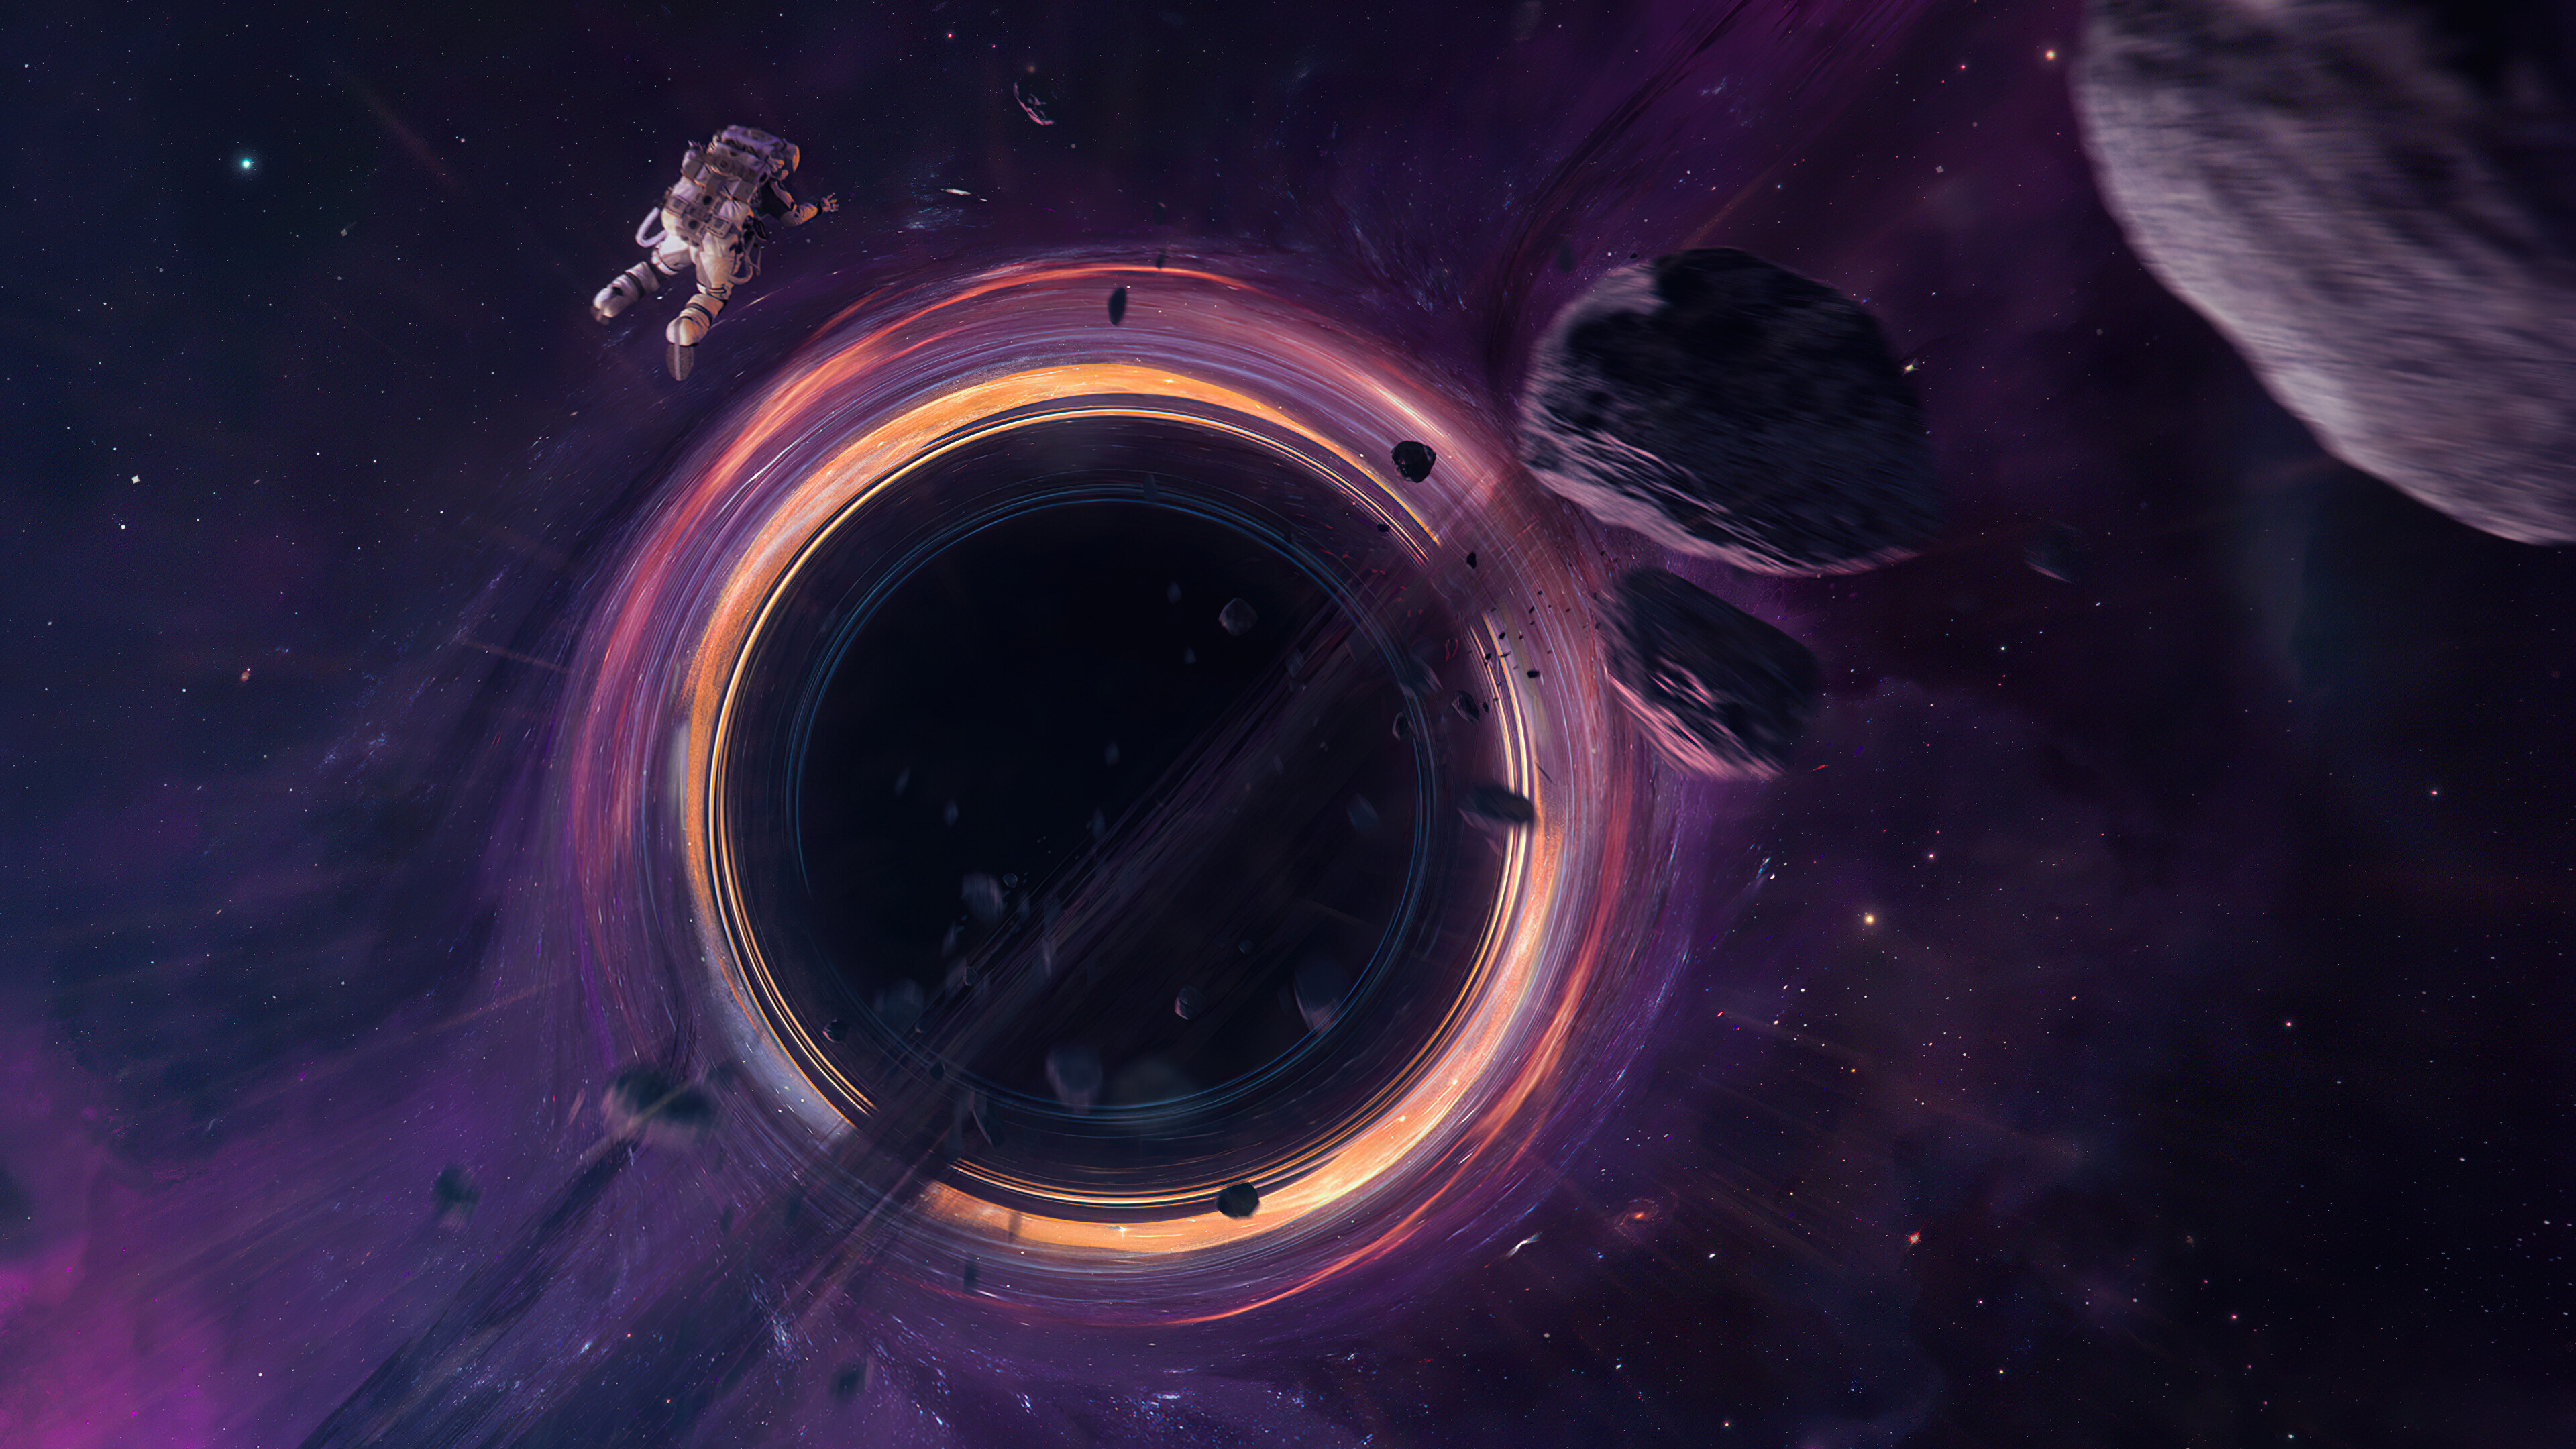 Black Hole: Points in space that are so dense they create deep gravity sinks. 3840x2160 4K Wallpaper.